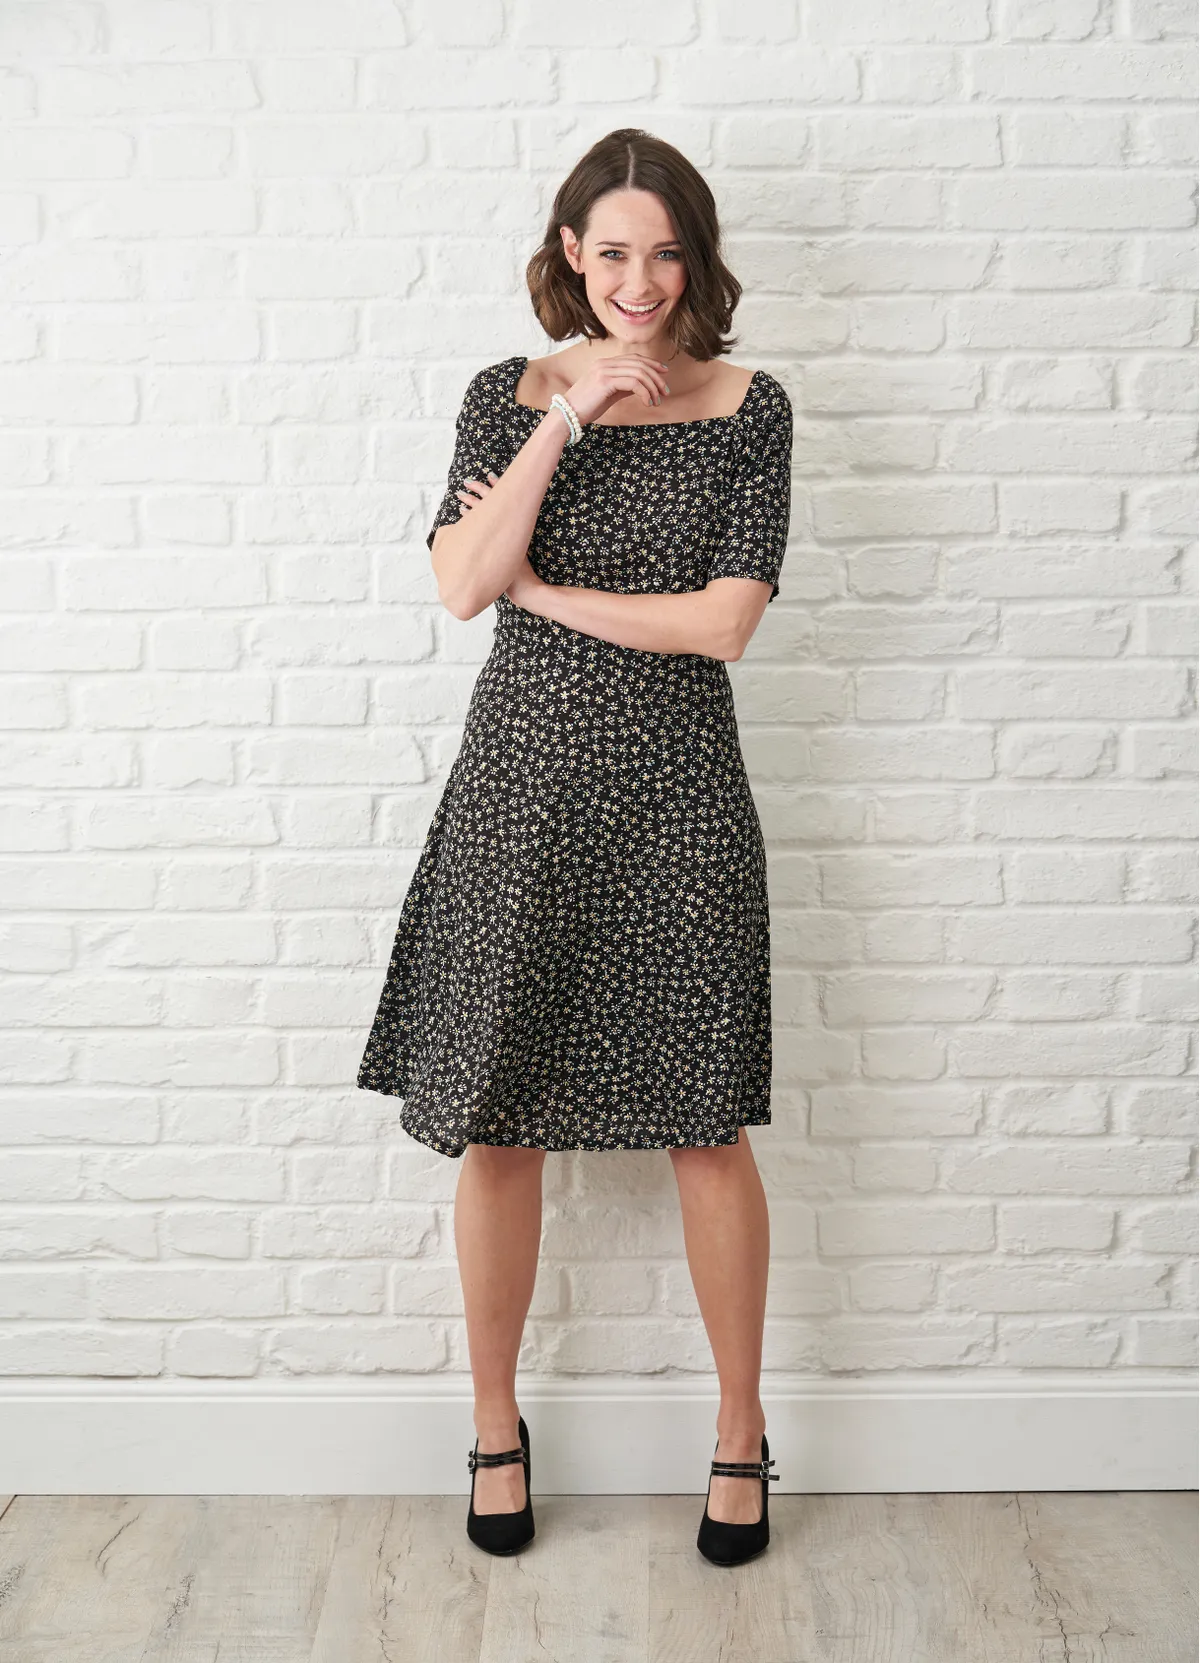 The Amelie Dress sewing pattern